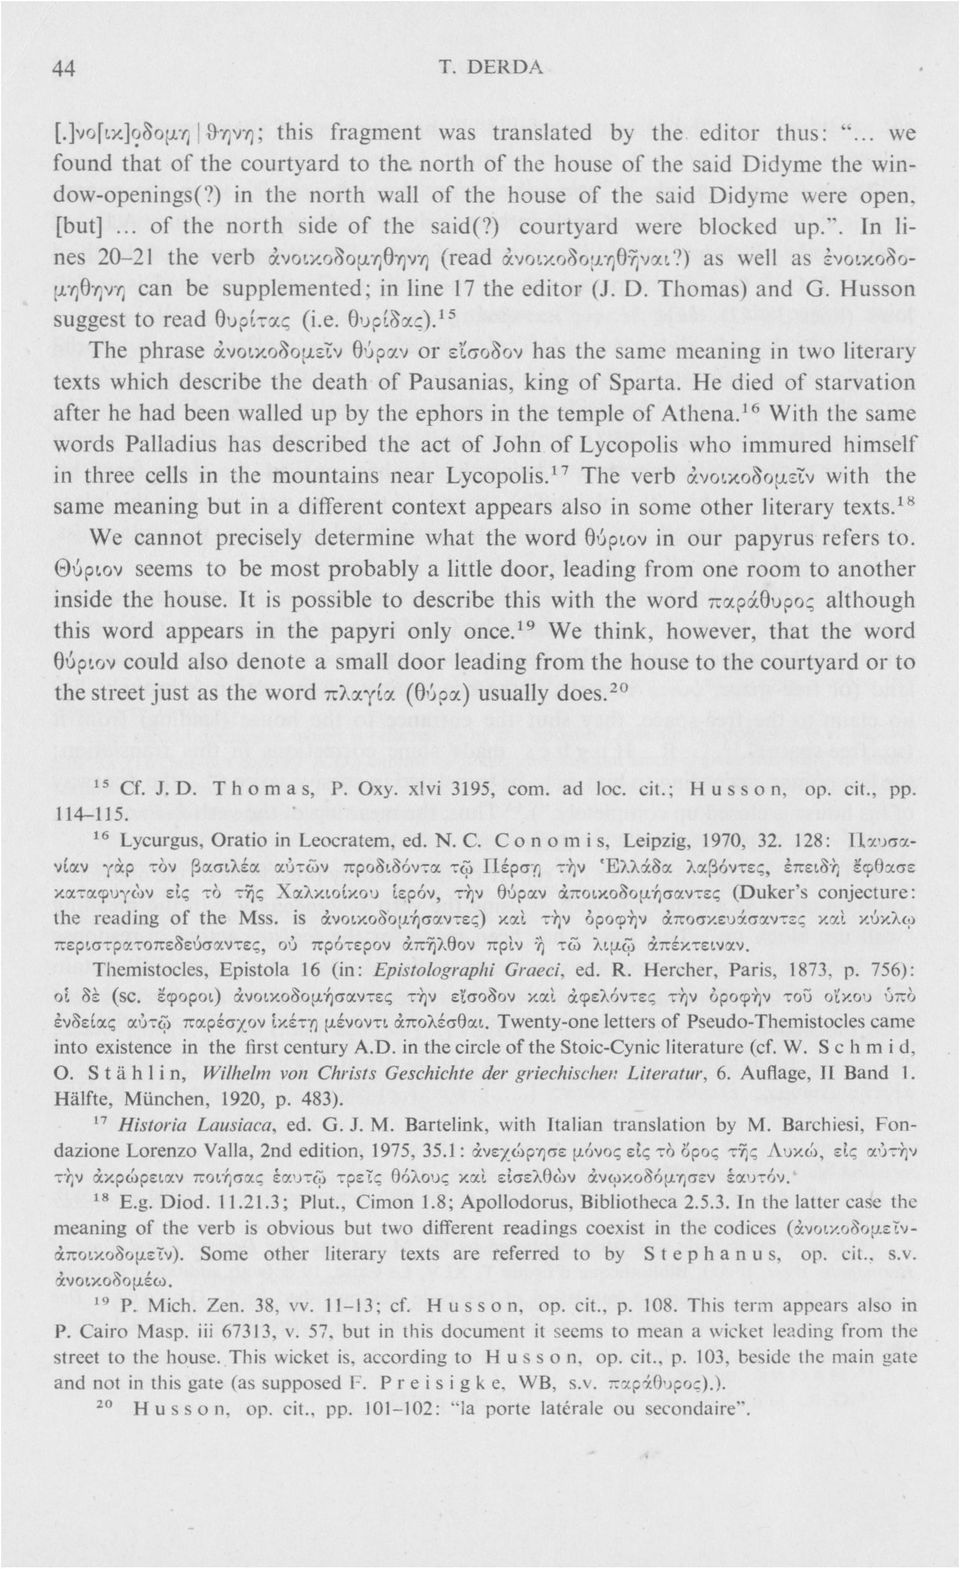 ) as well as ενοικοδομηθηνη can be supplemented; in line 17 the editor (J. D. Thomas) and G. Husson suggest to read θυρίτας (i.e. θυρίδας).